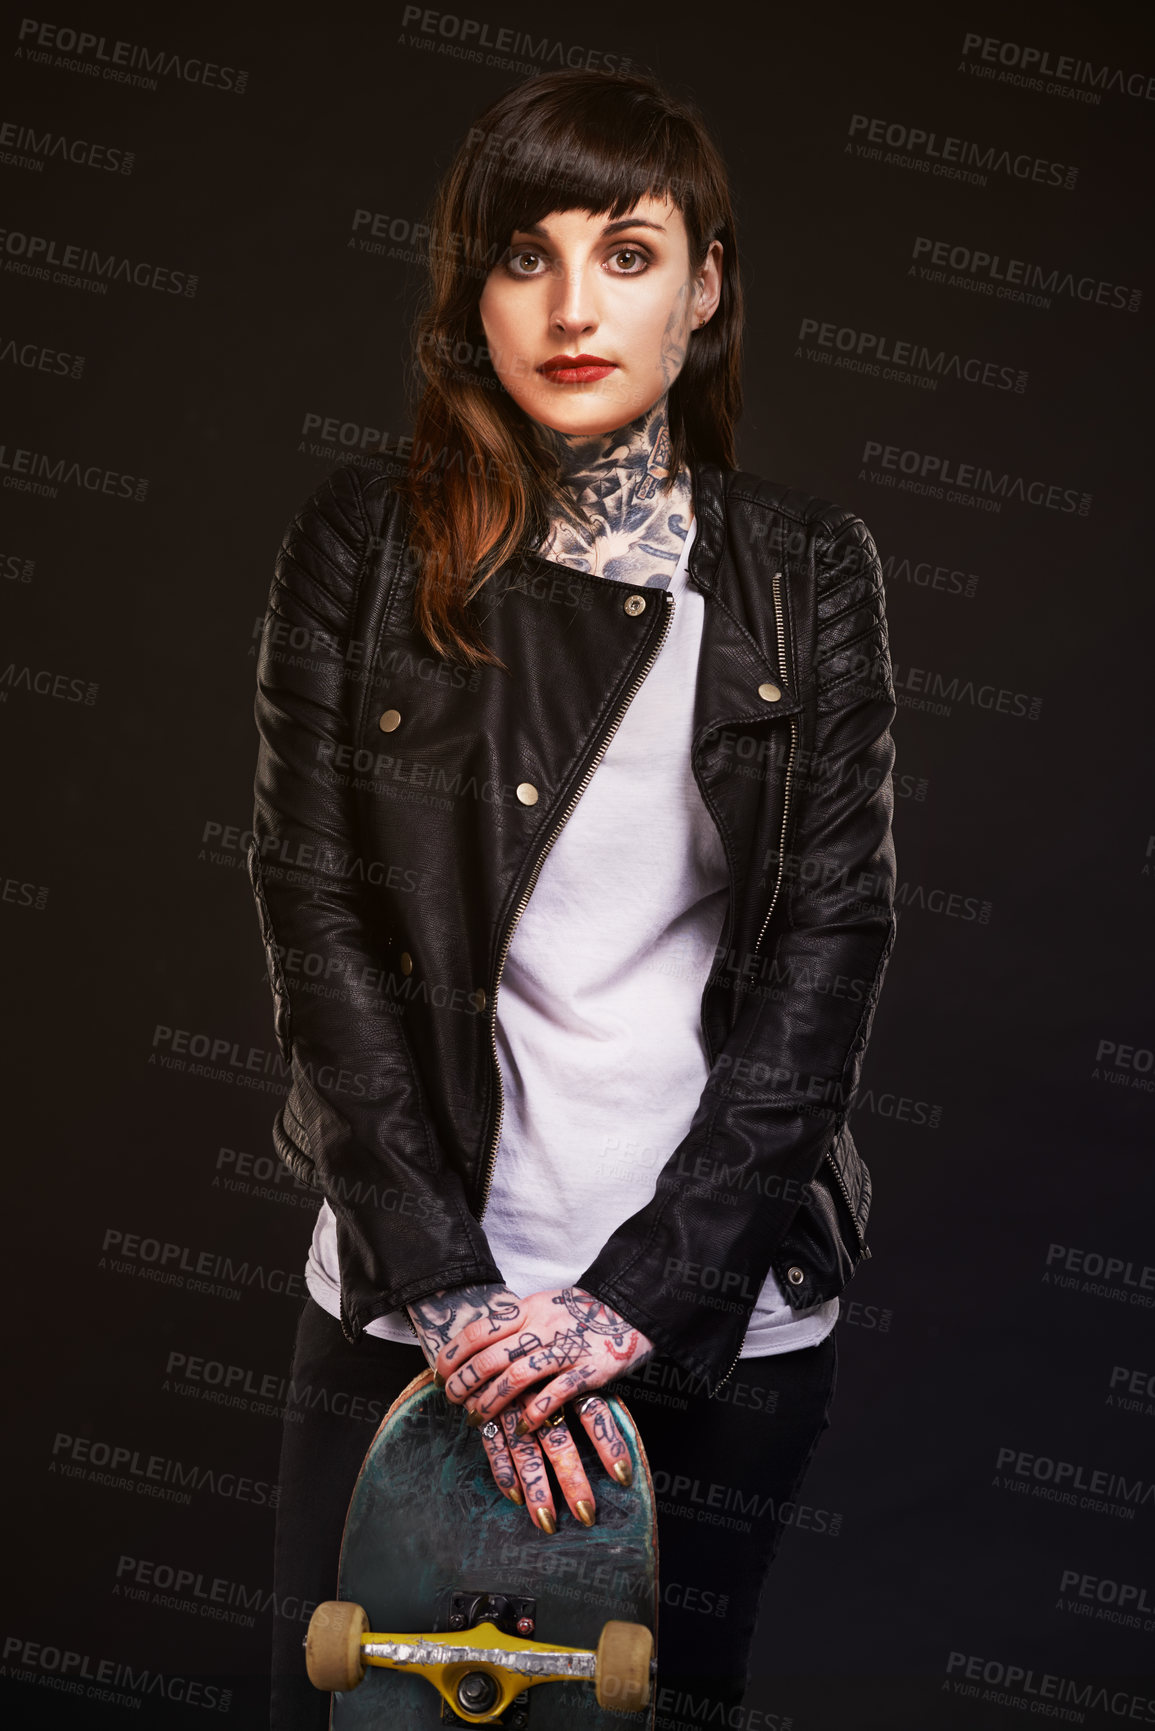 Buy stock photo Studio shot of a young skater covered in tattoos